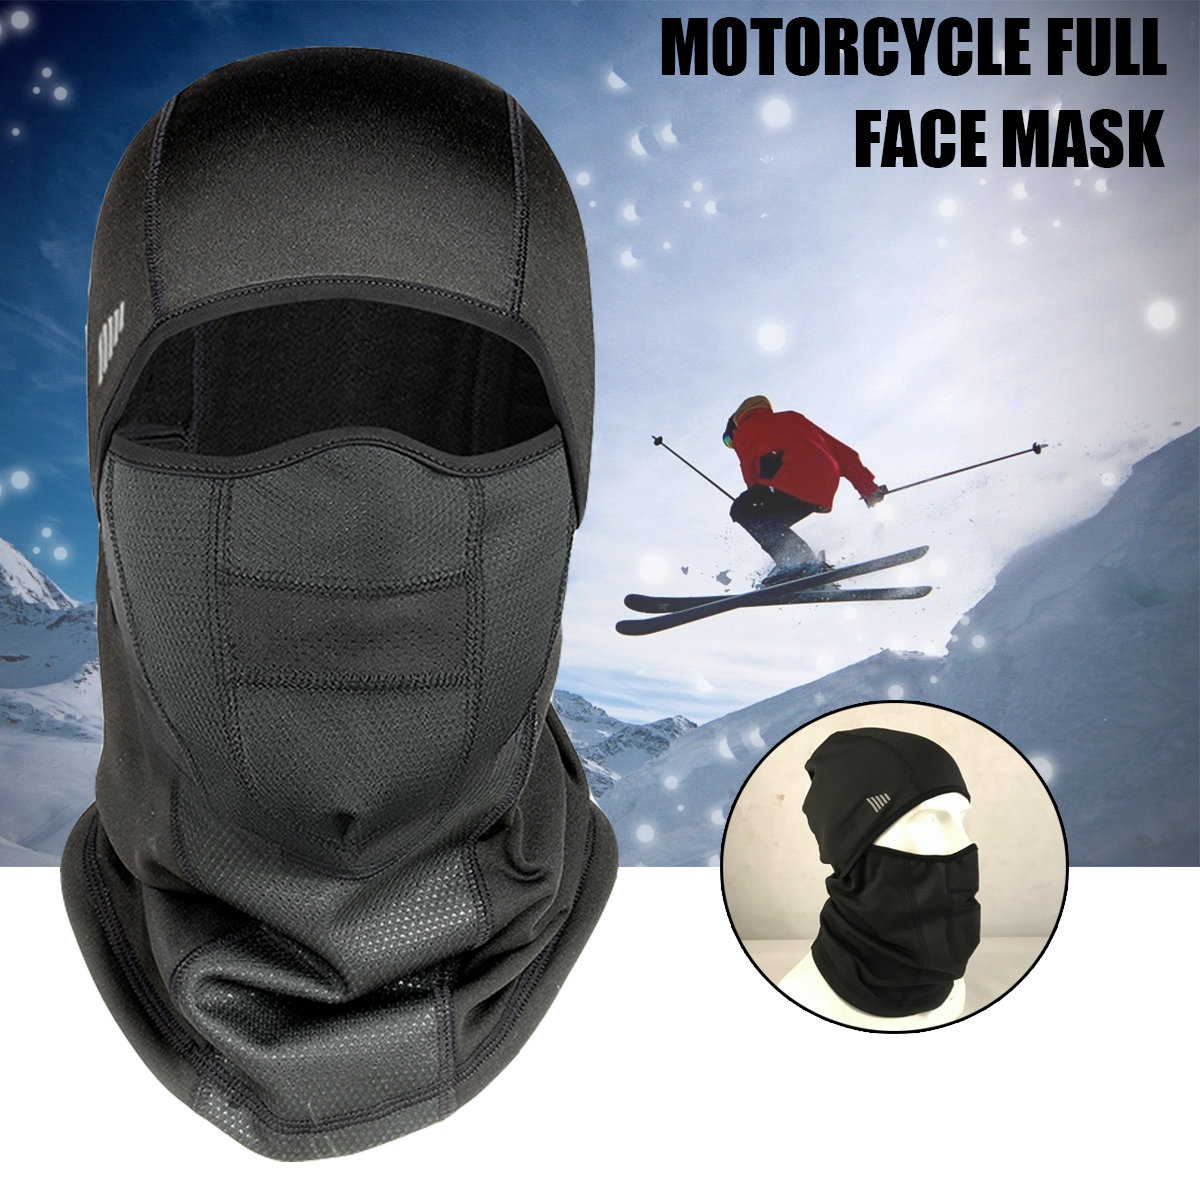 Other Clothing, Boots & Accessories - Motorcycle Riding Full Face Mask ...